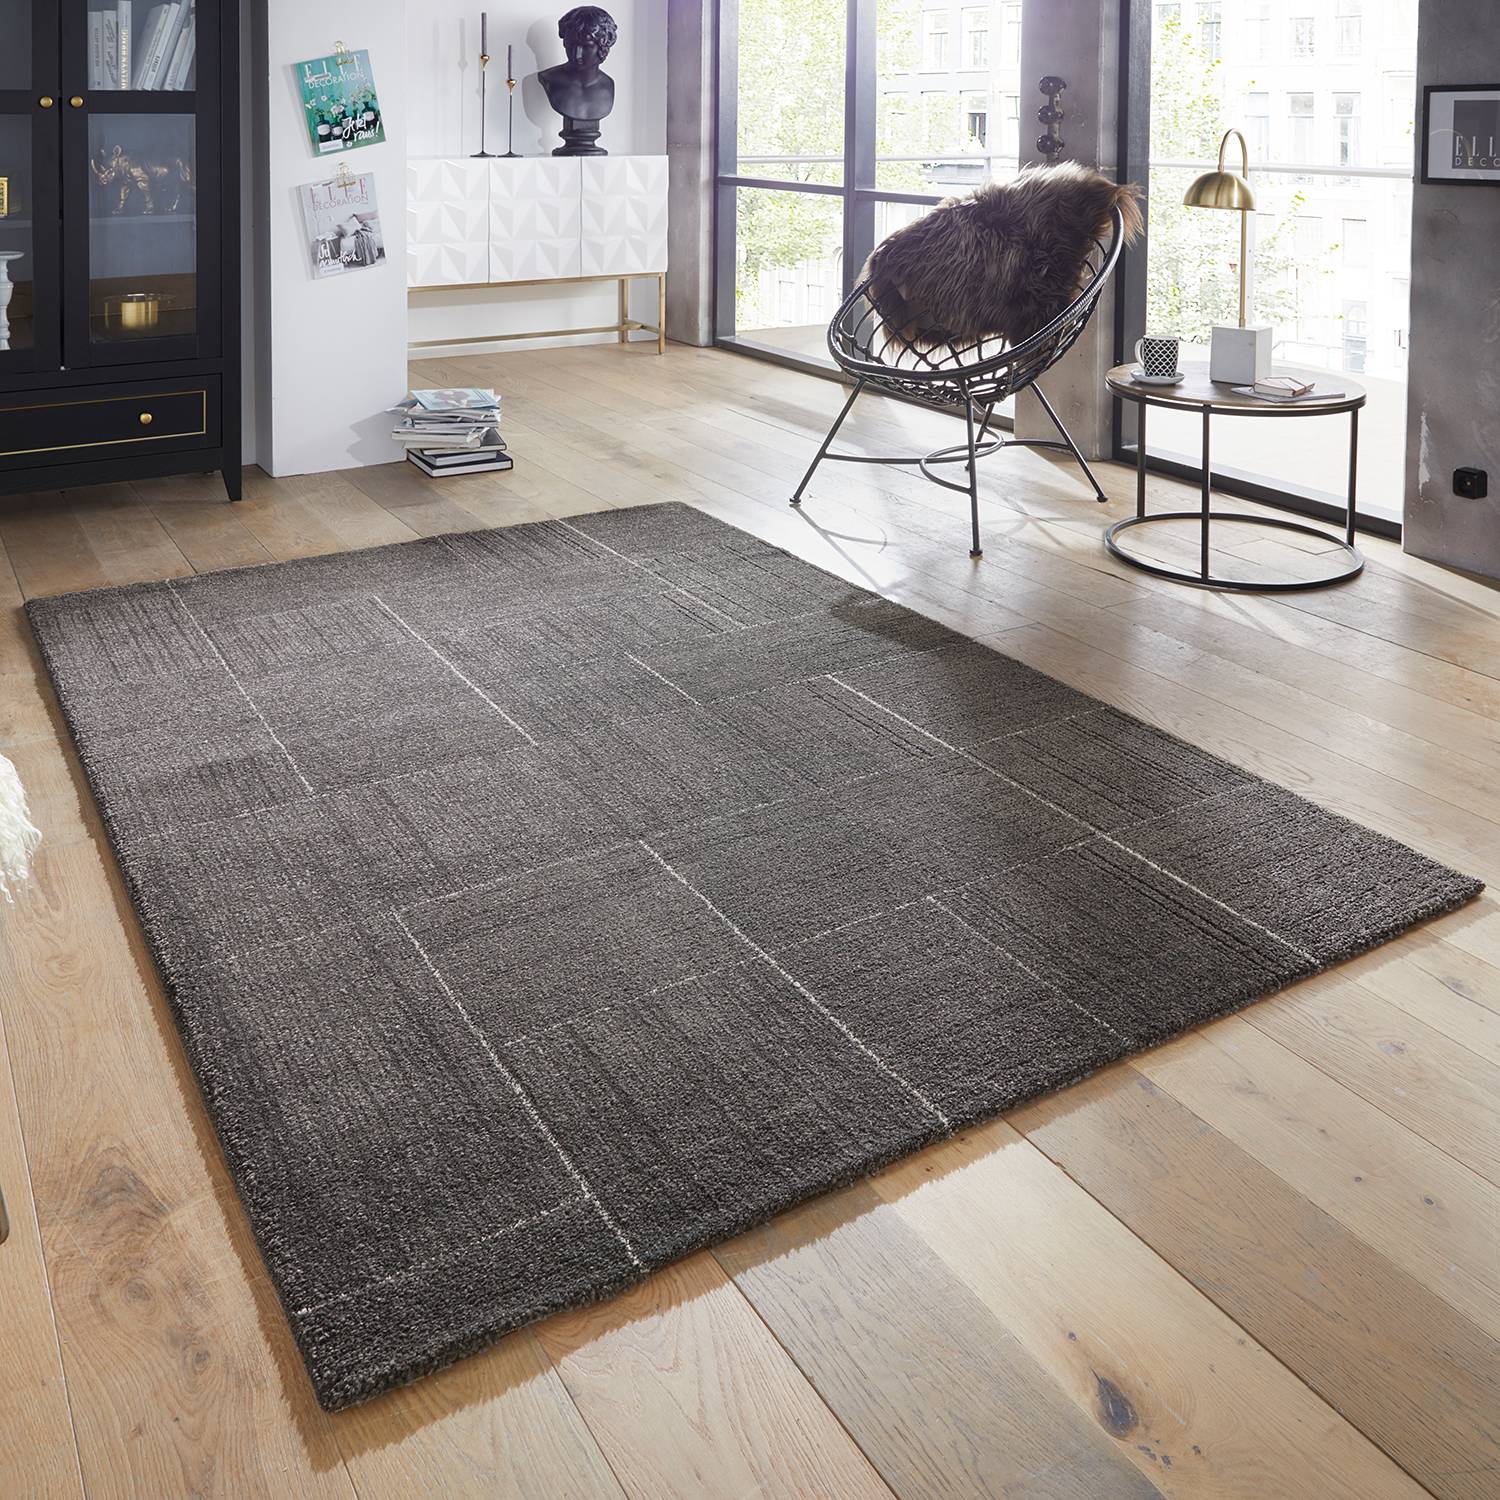 Image of Tapis Castres 000000001000167836